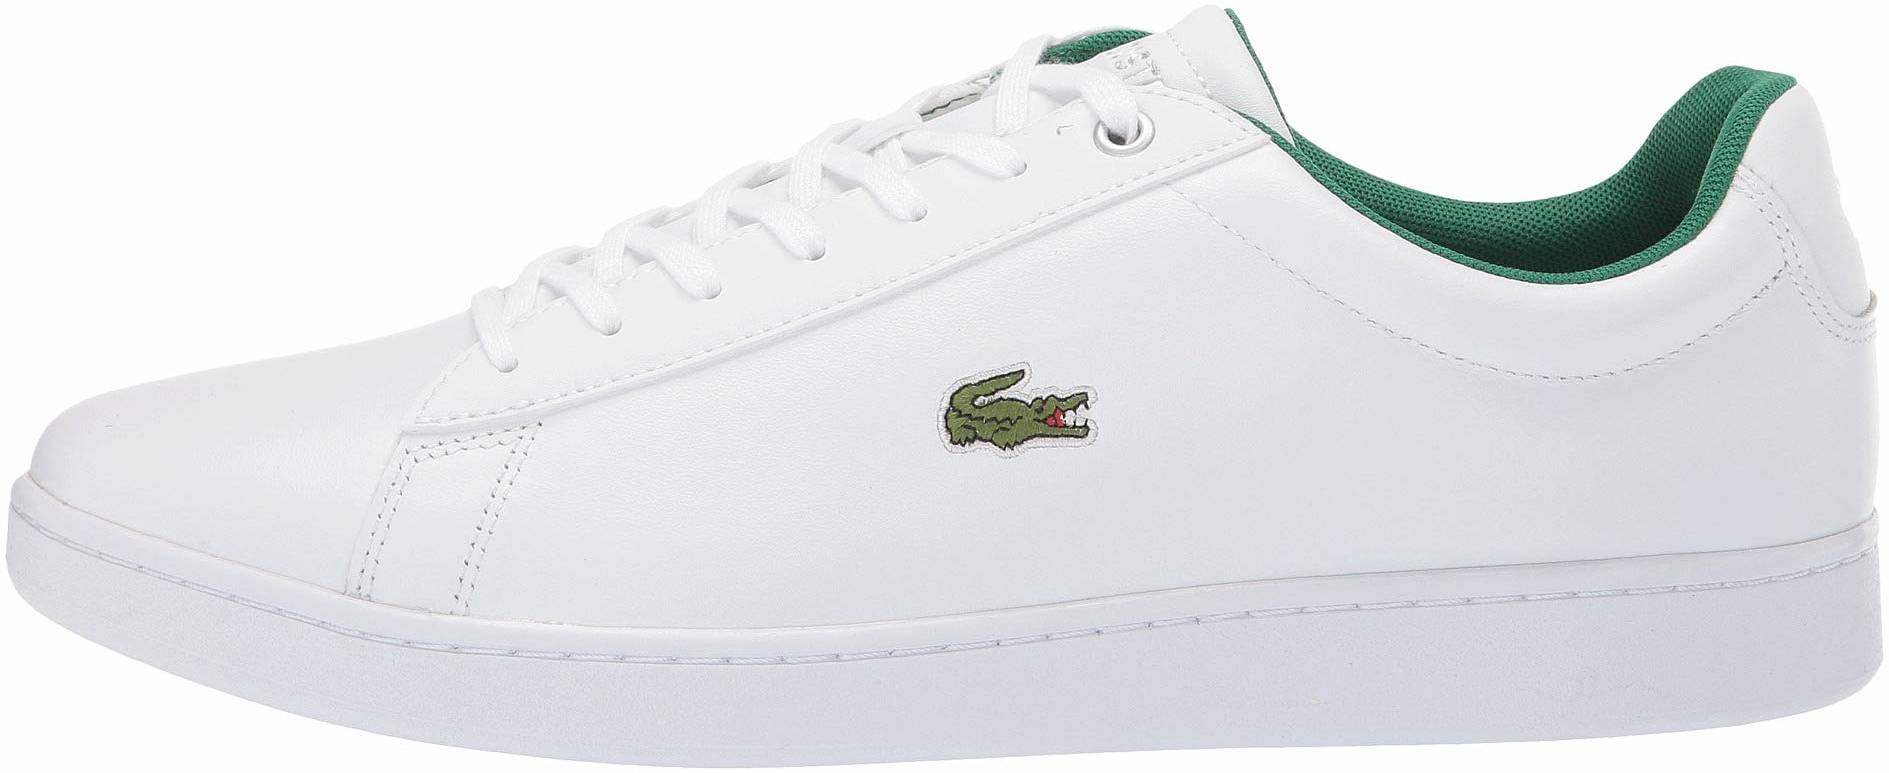 10+ Lacoste sneakers: Save up to 51% |